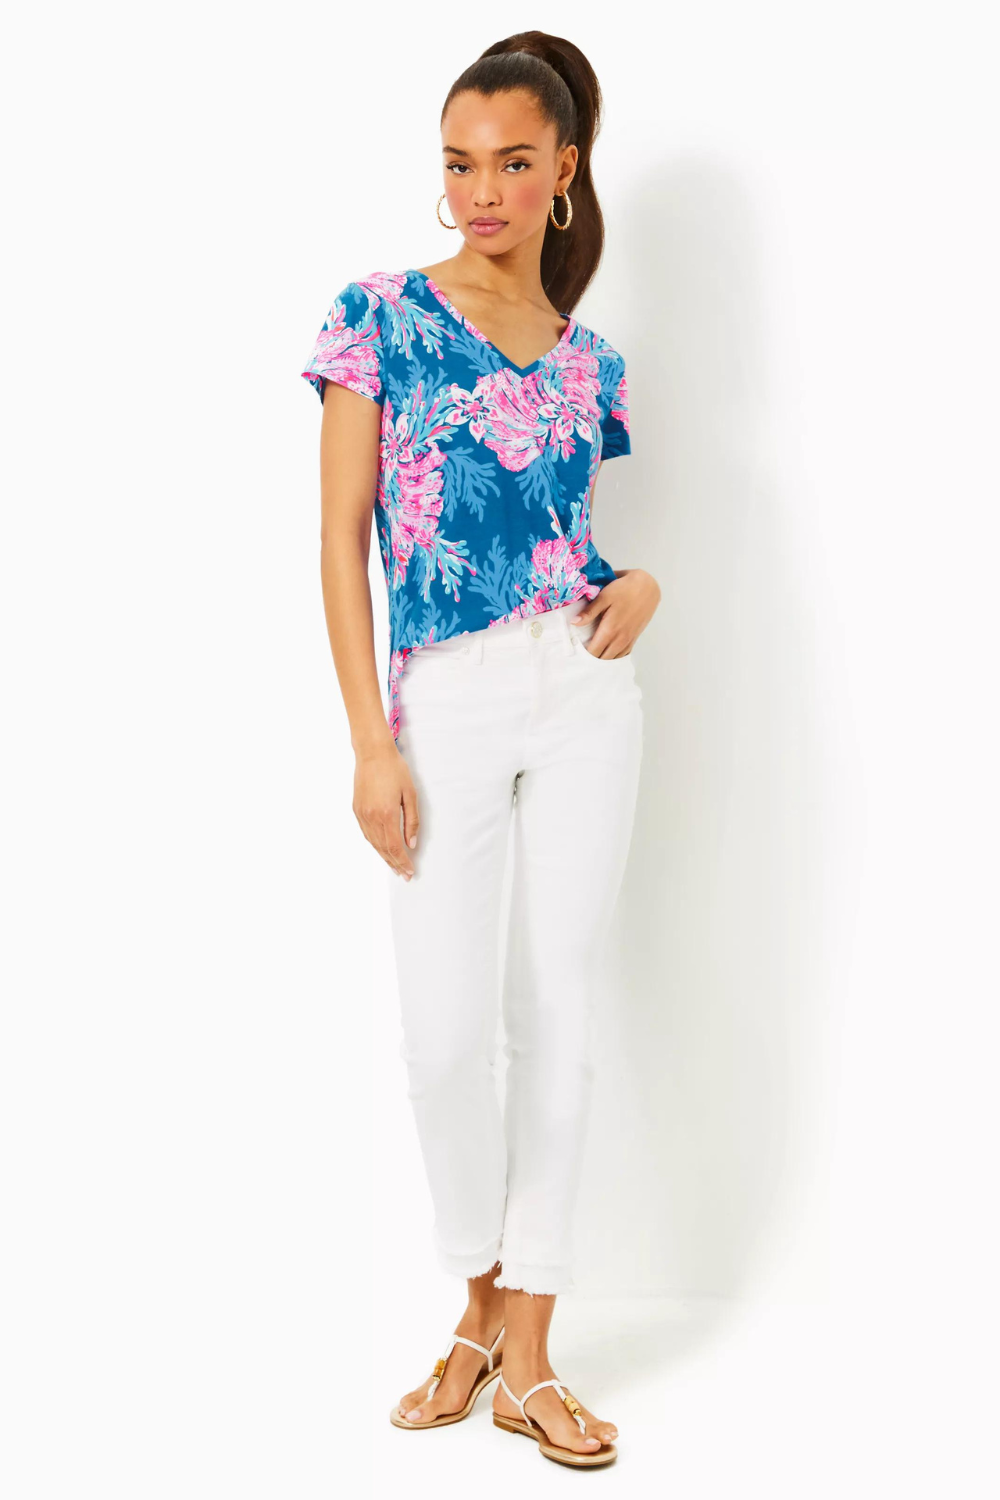 Lilly Pulitzer Meredith Tee - For the Fans